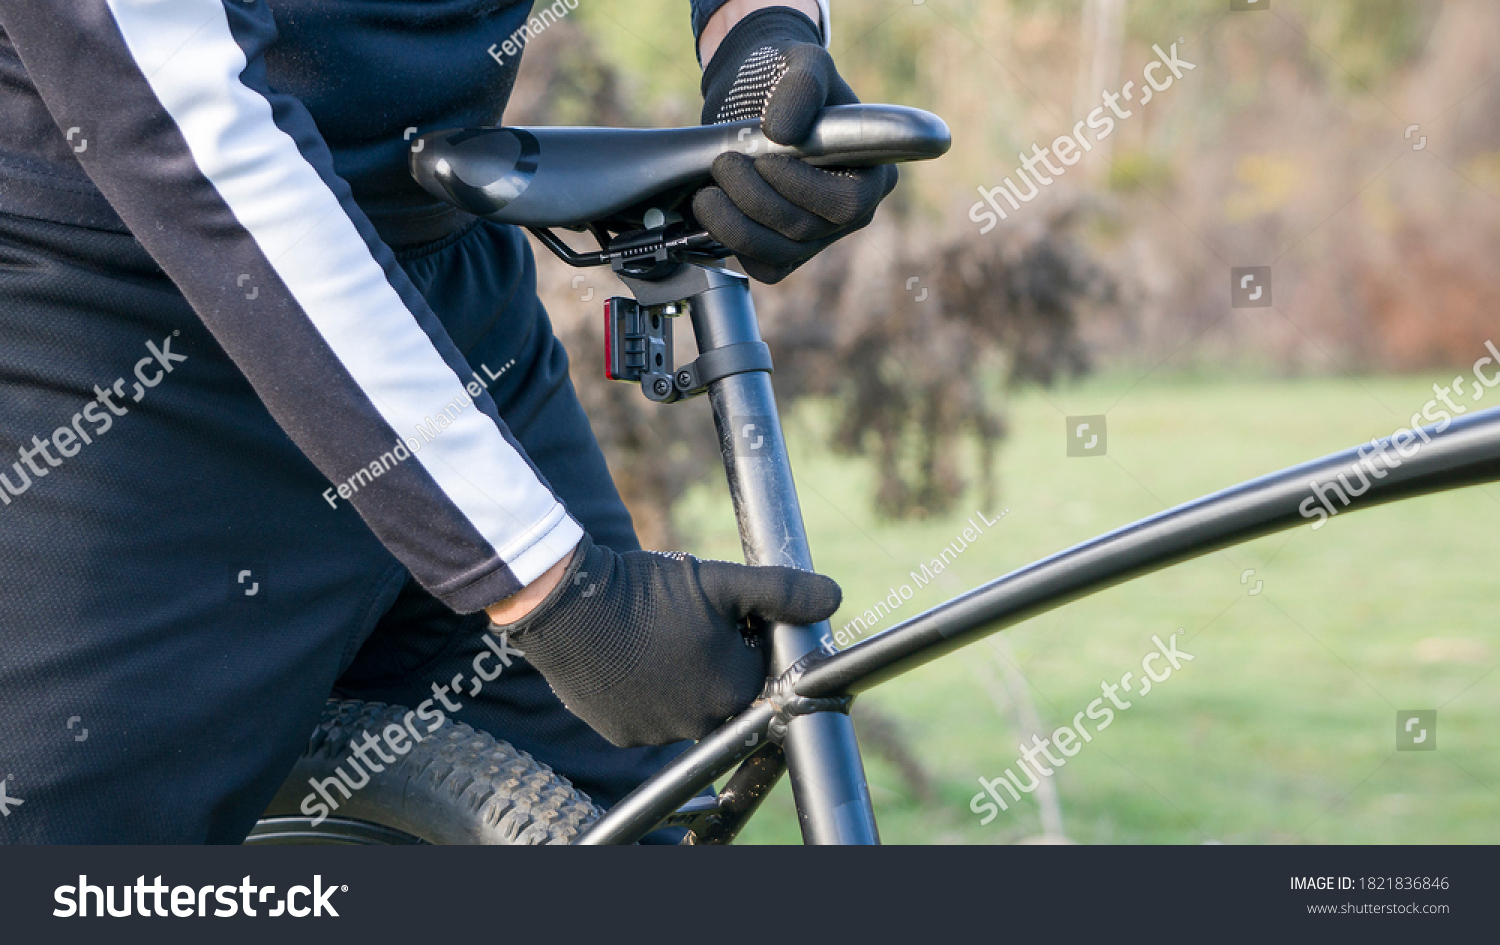 cyclist with black gloves adjusting black seat #1821836846